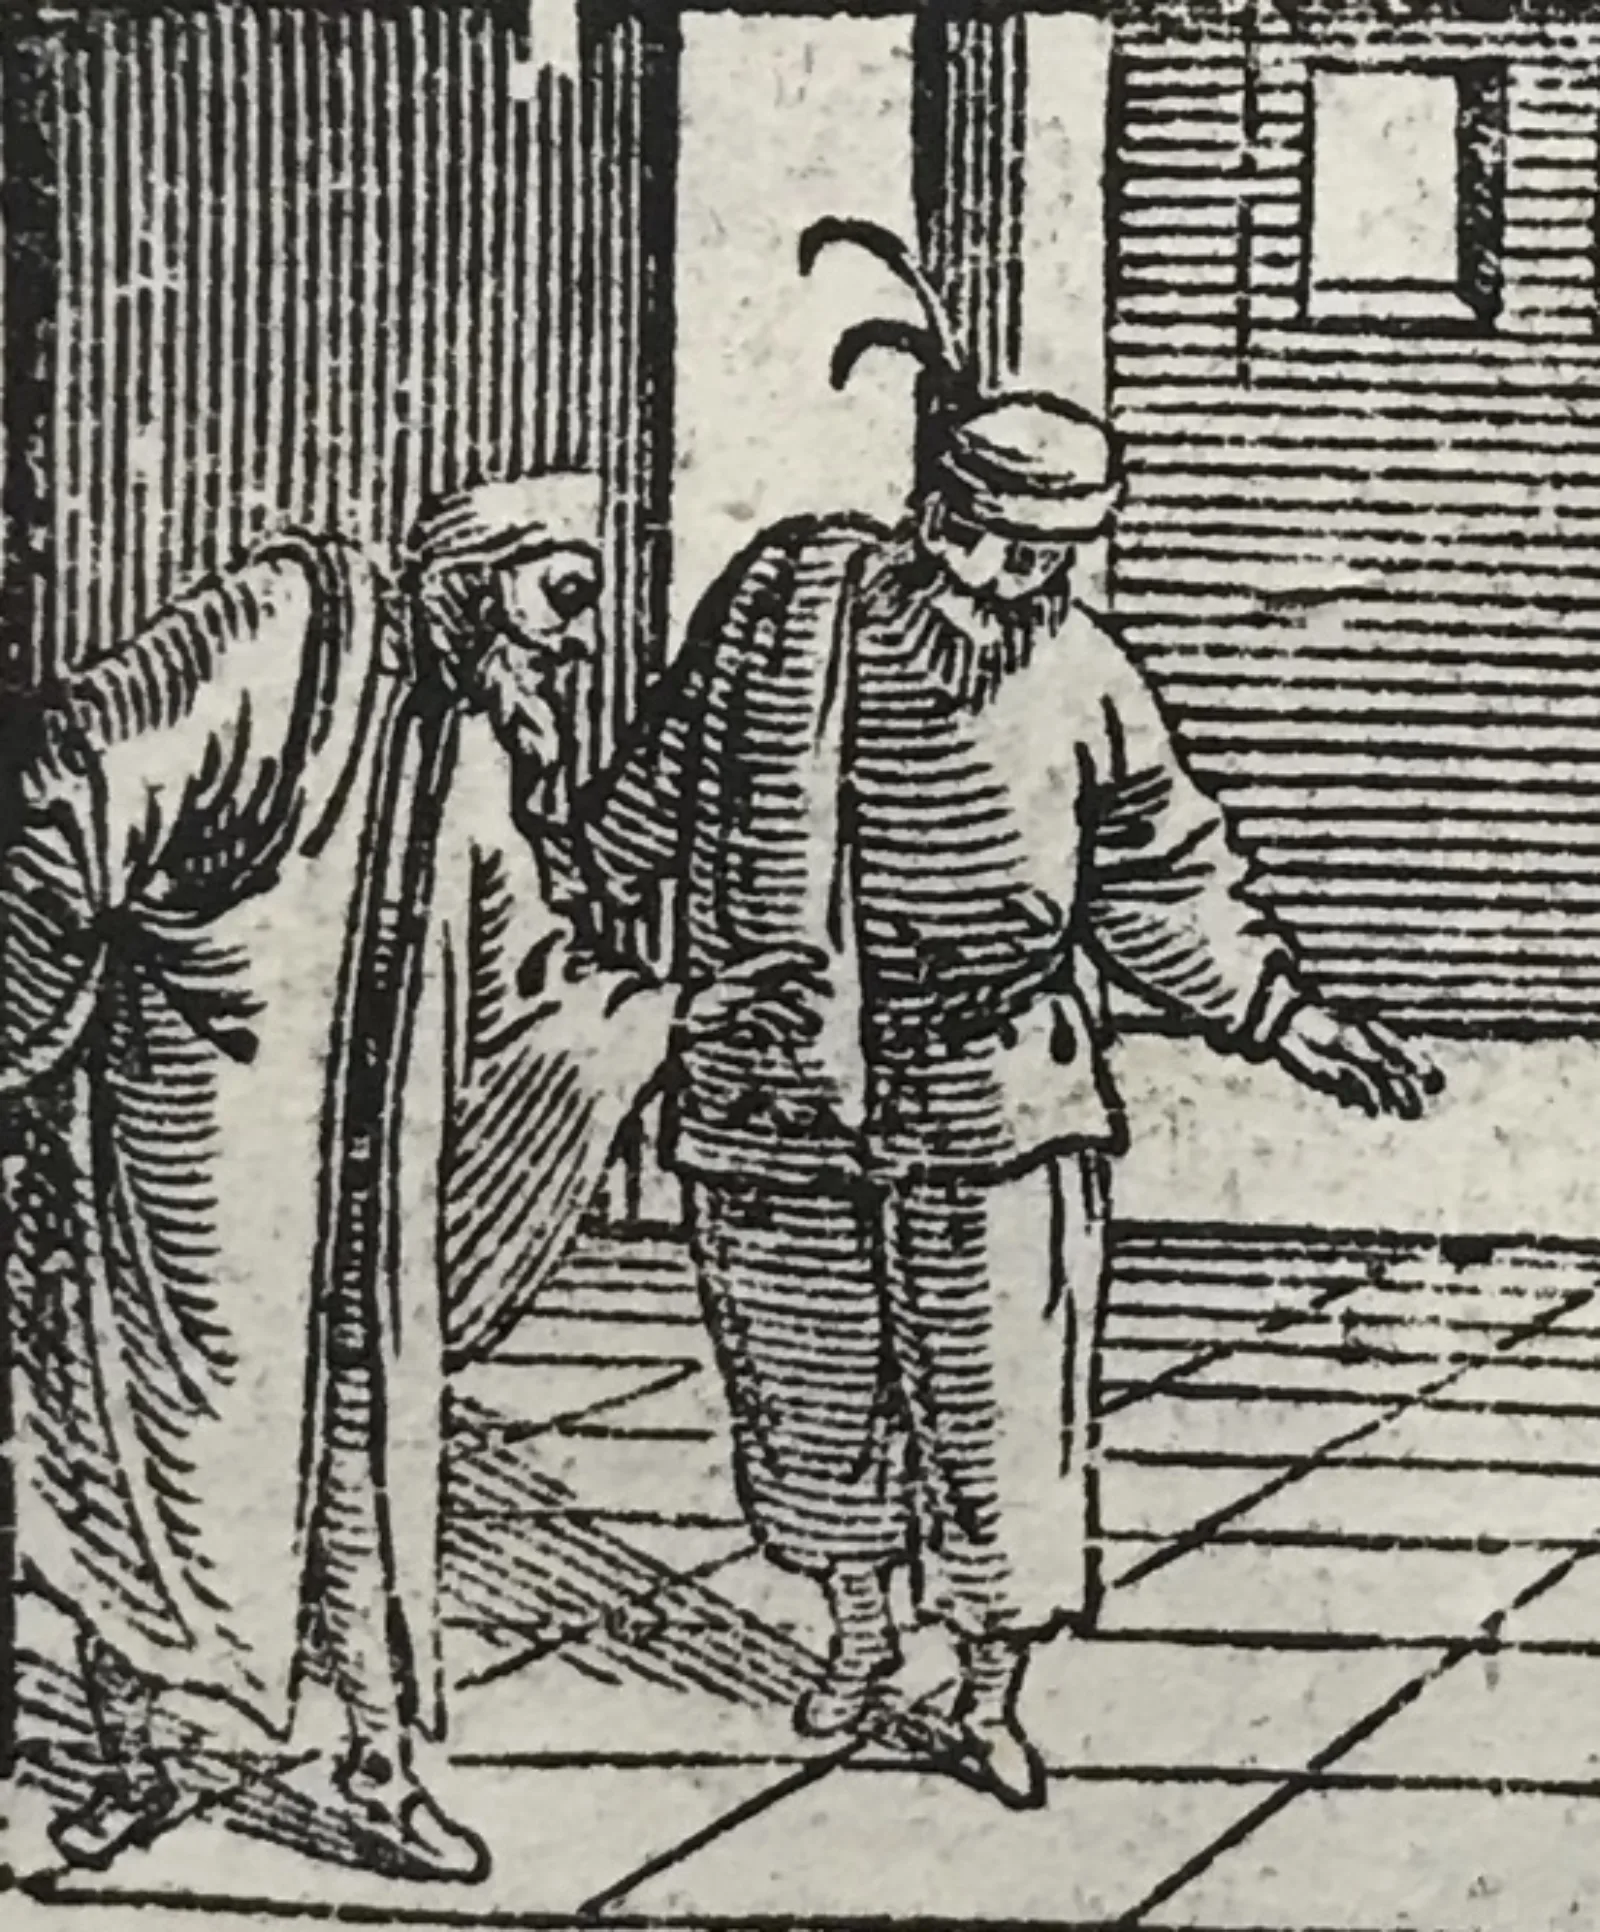 Detail of Pantalone and Zanni in the Newberry Missal. On the left is Pantalone, leaning forward with one hand behind and one in front. On the right is Zanni, seen with his loose, ankle-length trousers and a long-sleeved jacket of light-colored linen held with a belt.